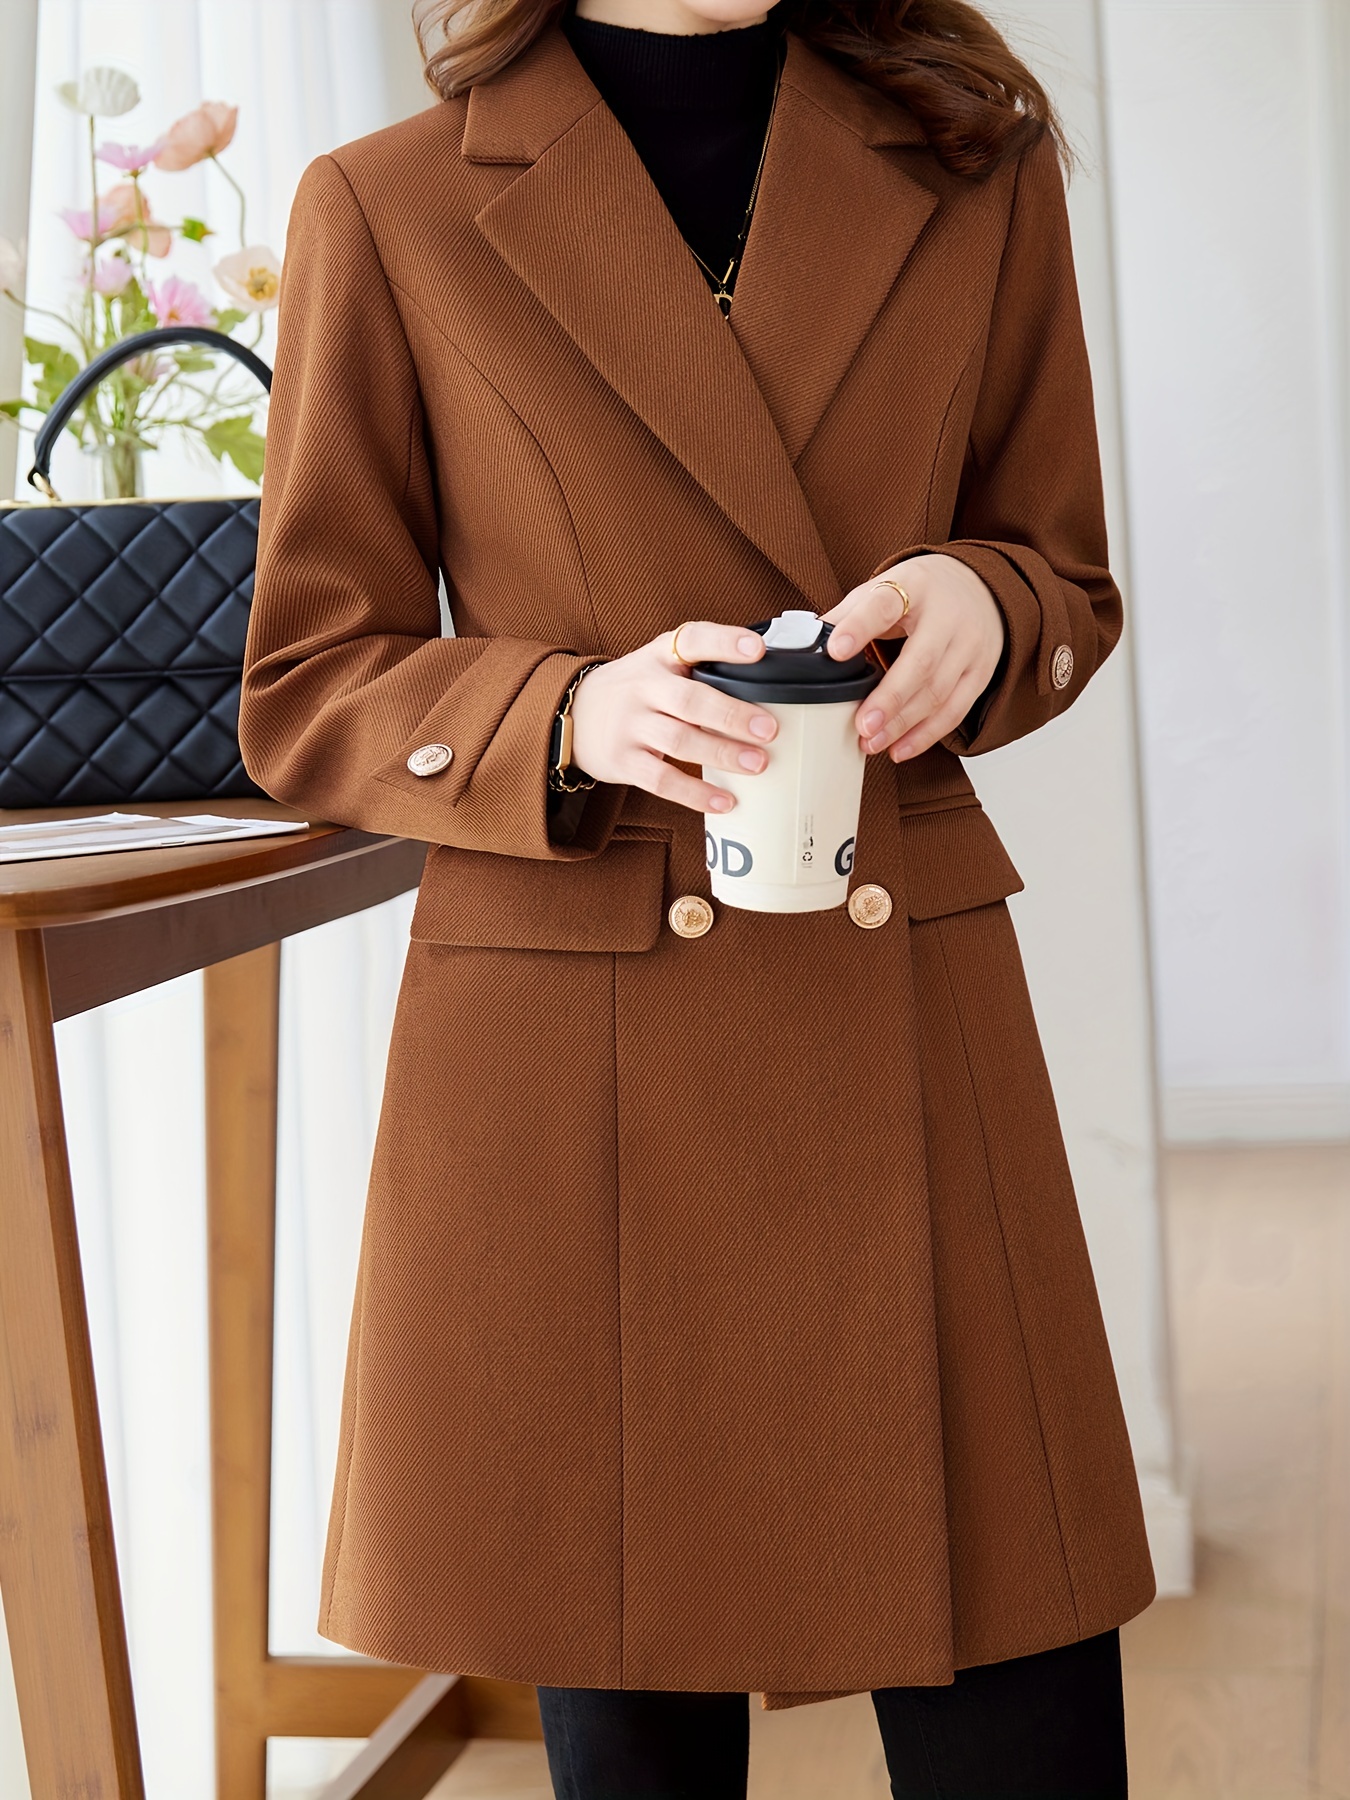 solid double breasted lapel overcoat elegant long sleeve mid length coat for fall winter womens clothing details 5